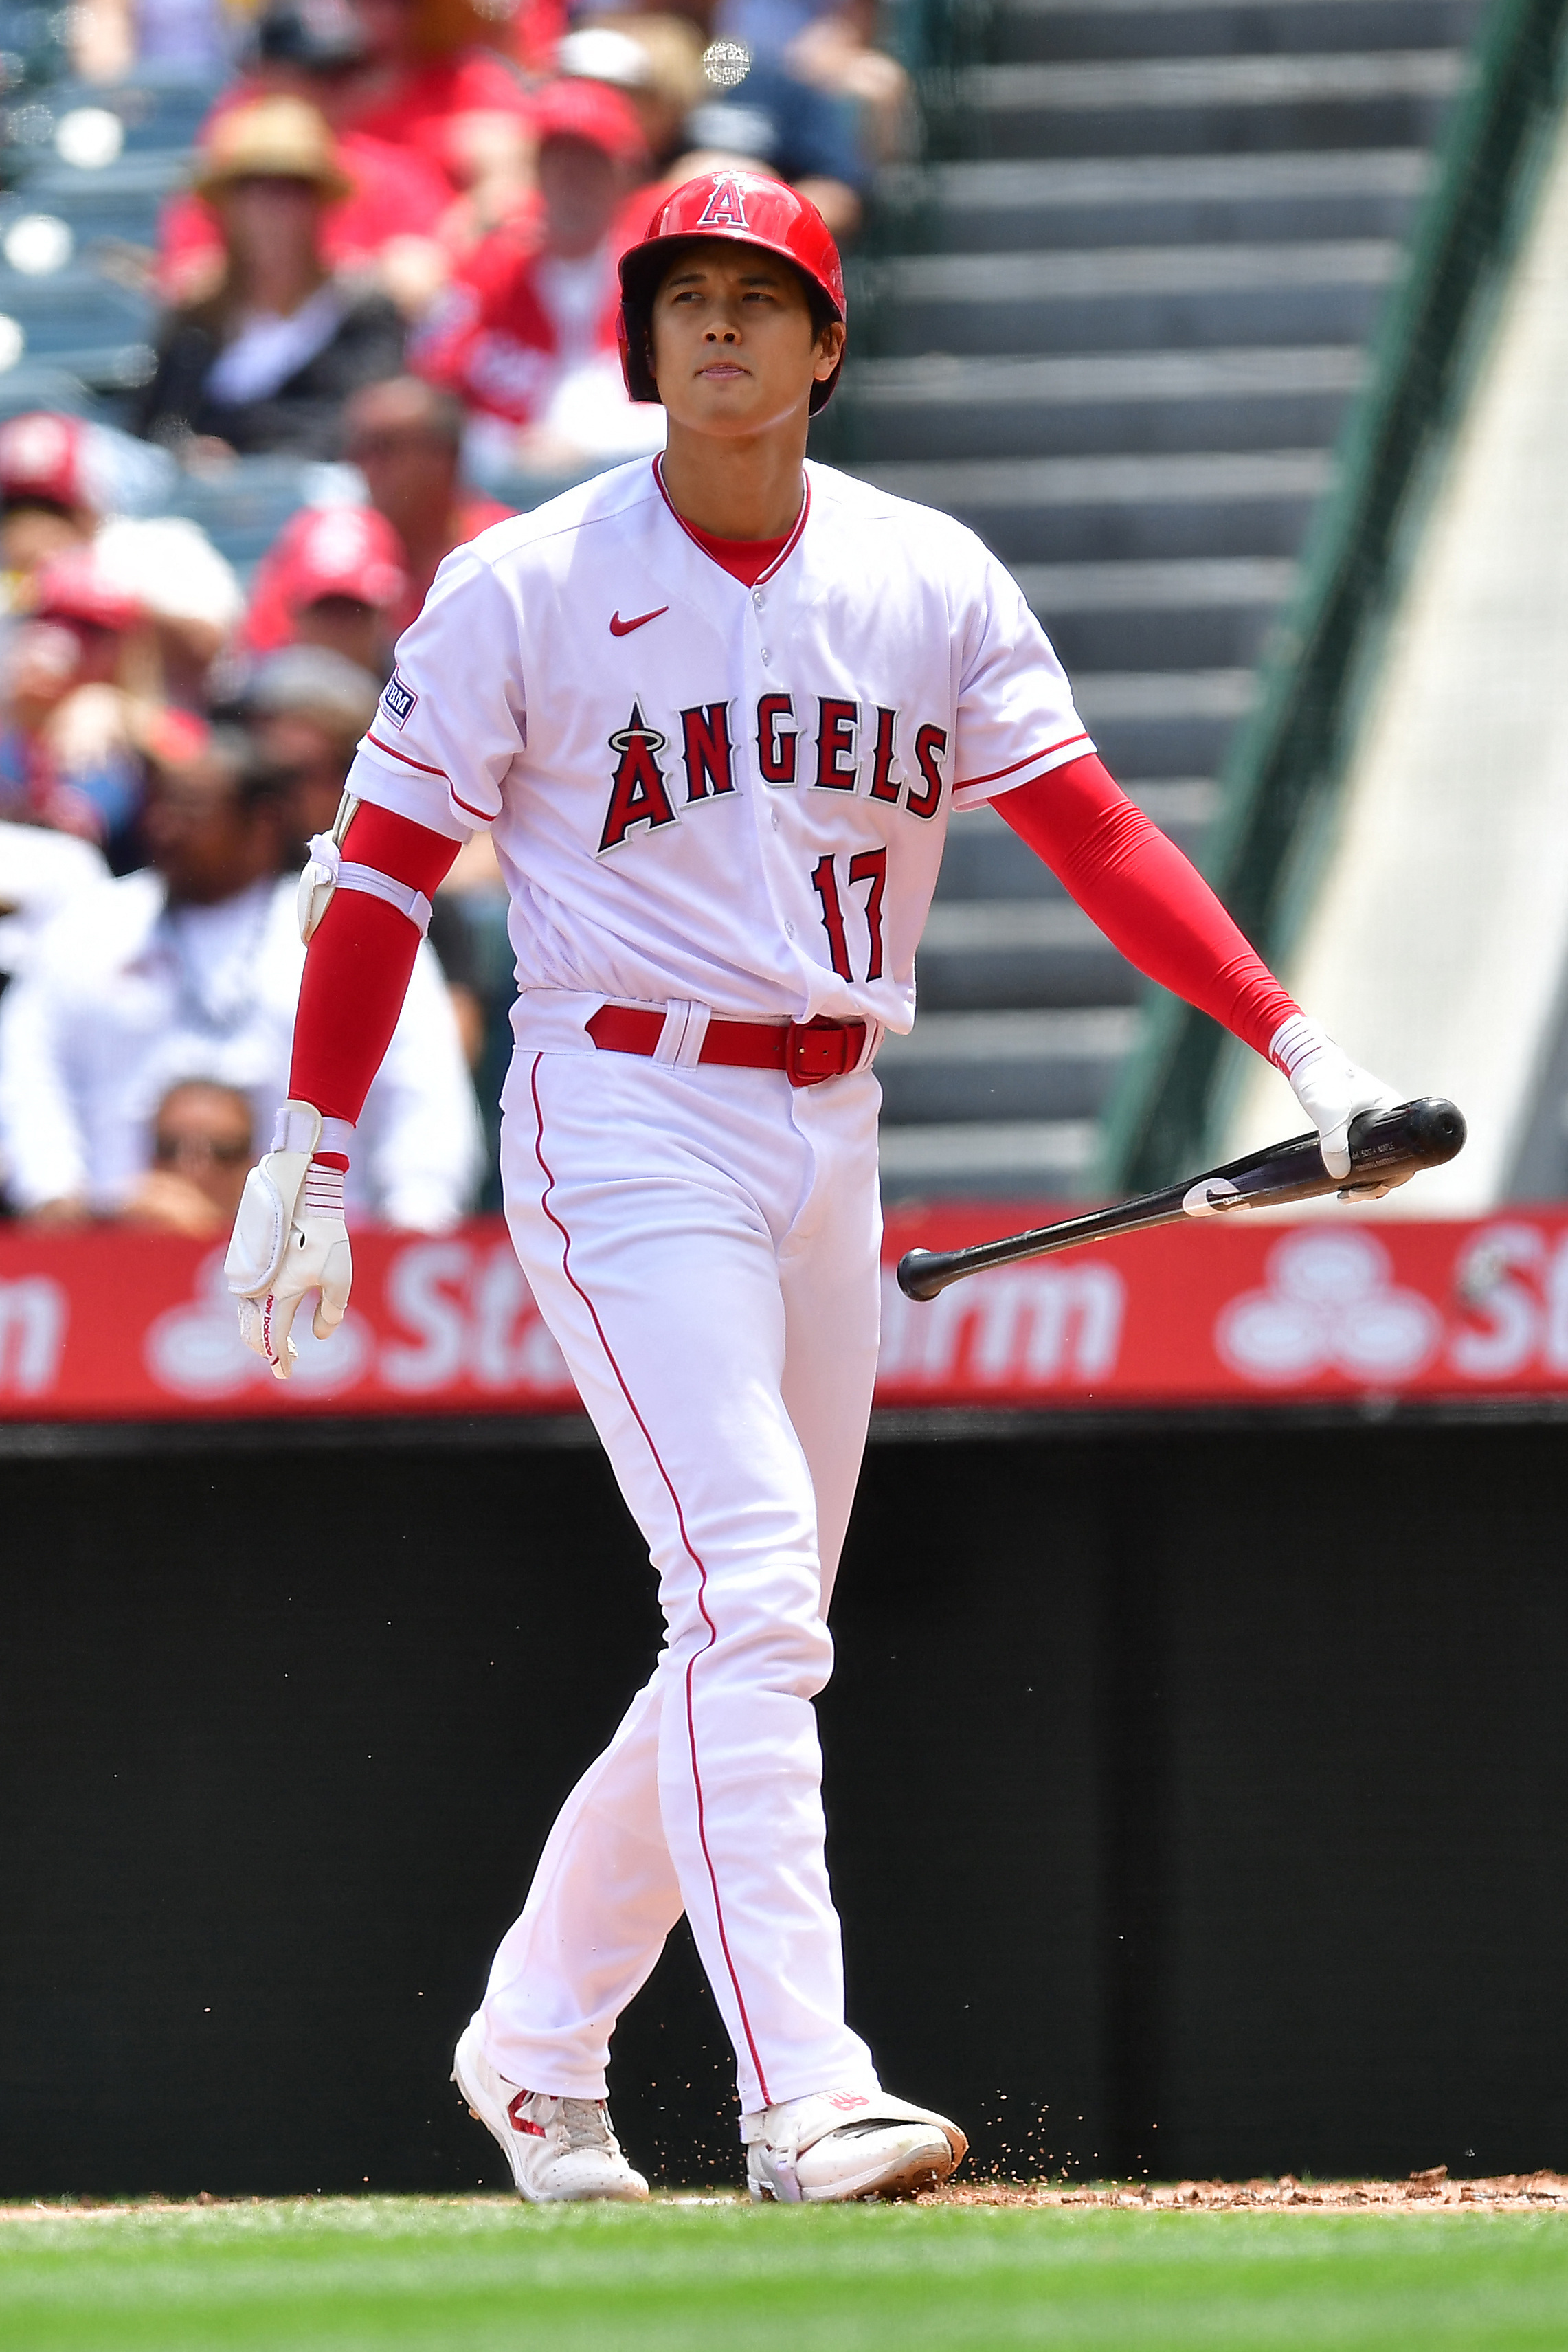 Houston Astros: Cristian Javier puts an oh-fer on Trout, Ohtani